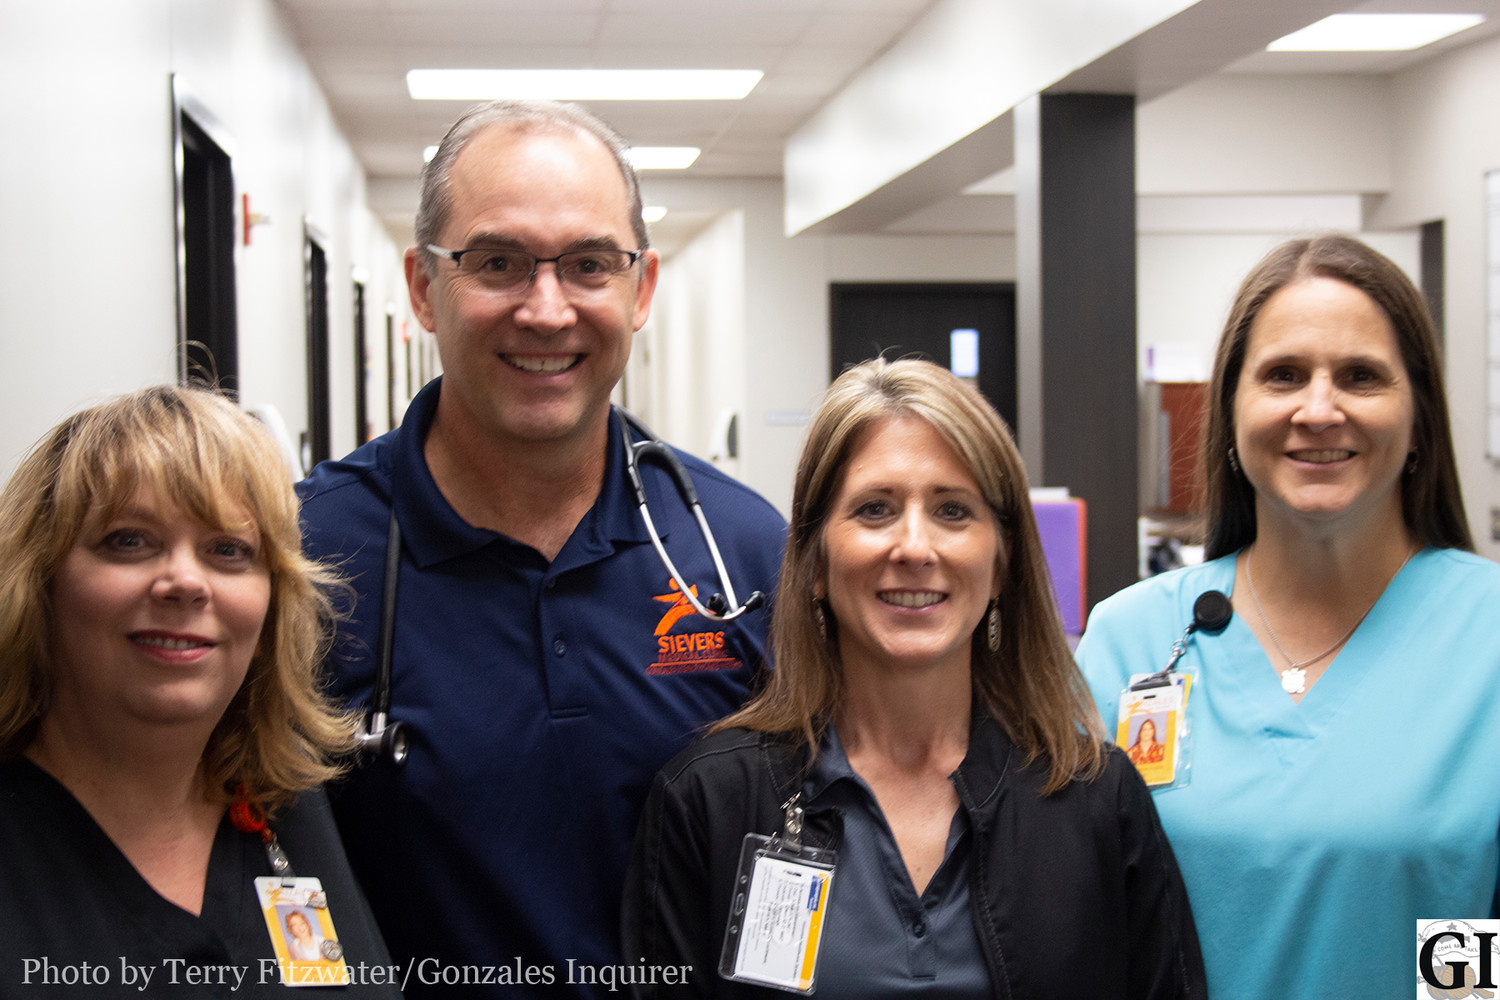 Dr. Hisey is proud of his longtime staff, including Doreen Funk, Stephanie Fojtik and Stacy Davis.